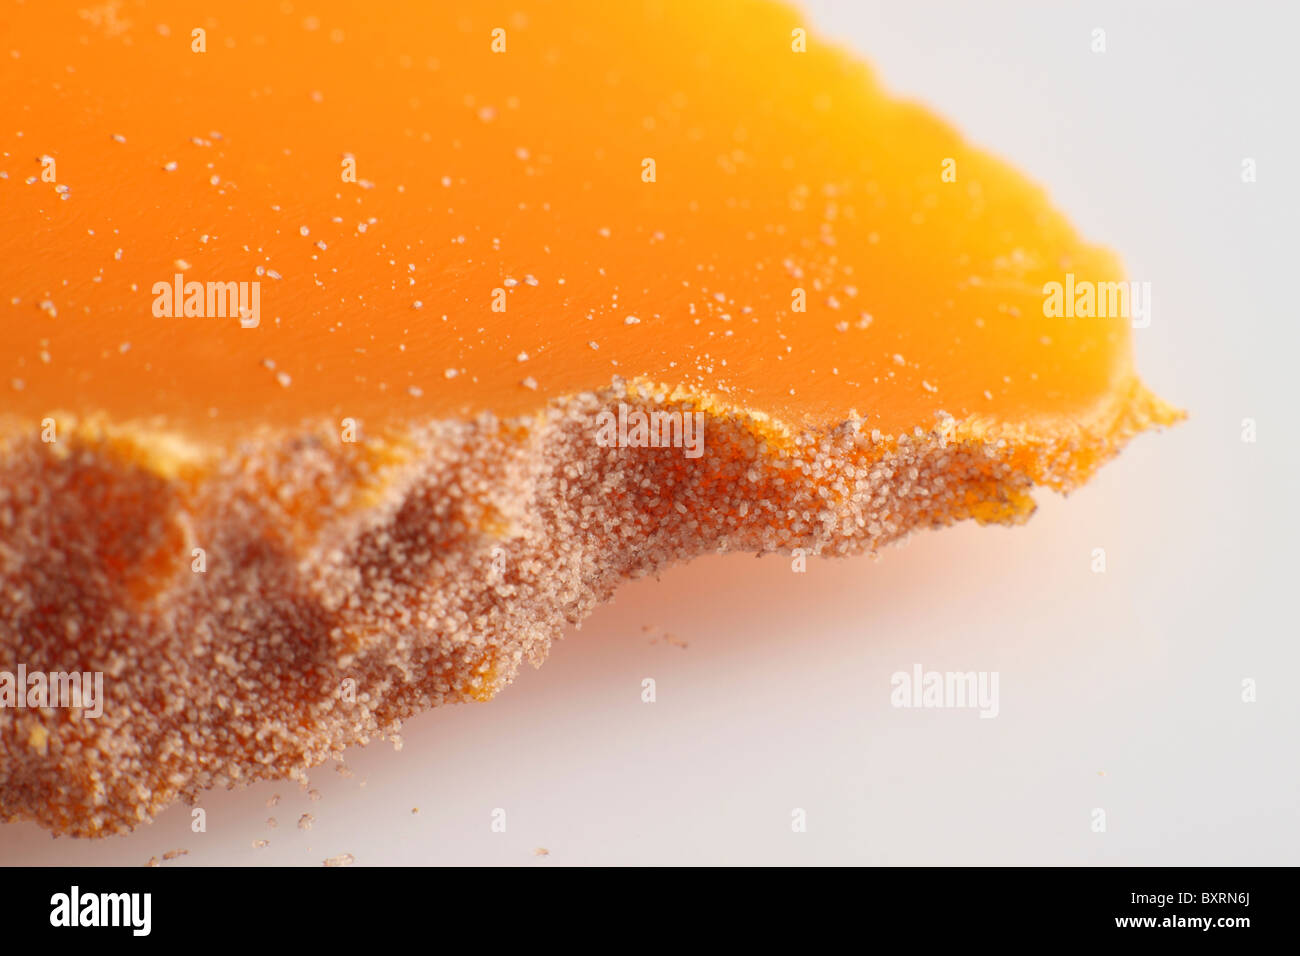 Slice of French Mimolette cow's milk cheese, close-up Stock Photo